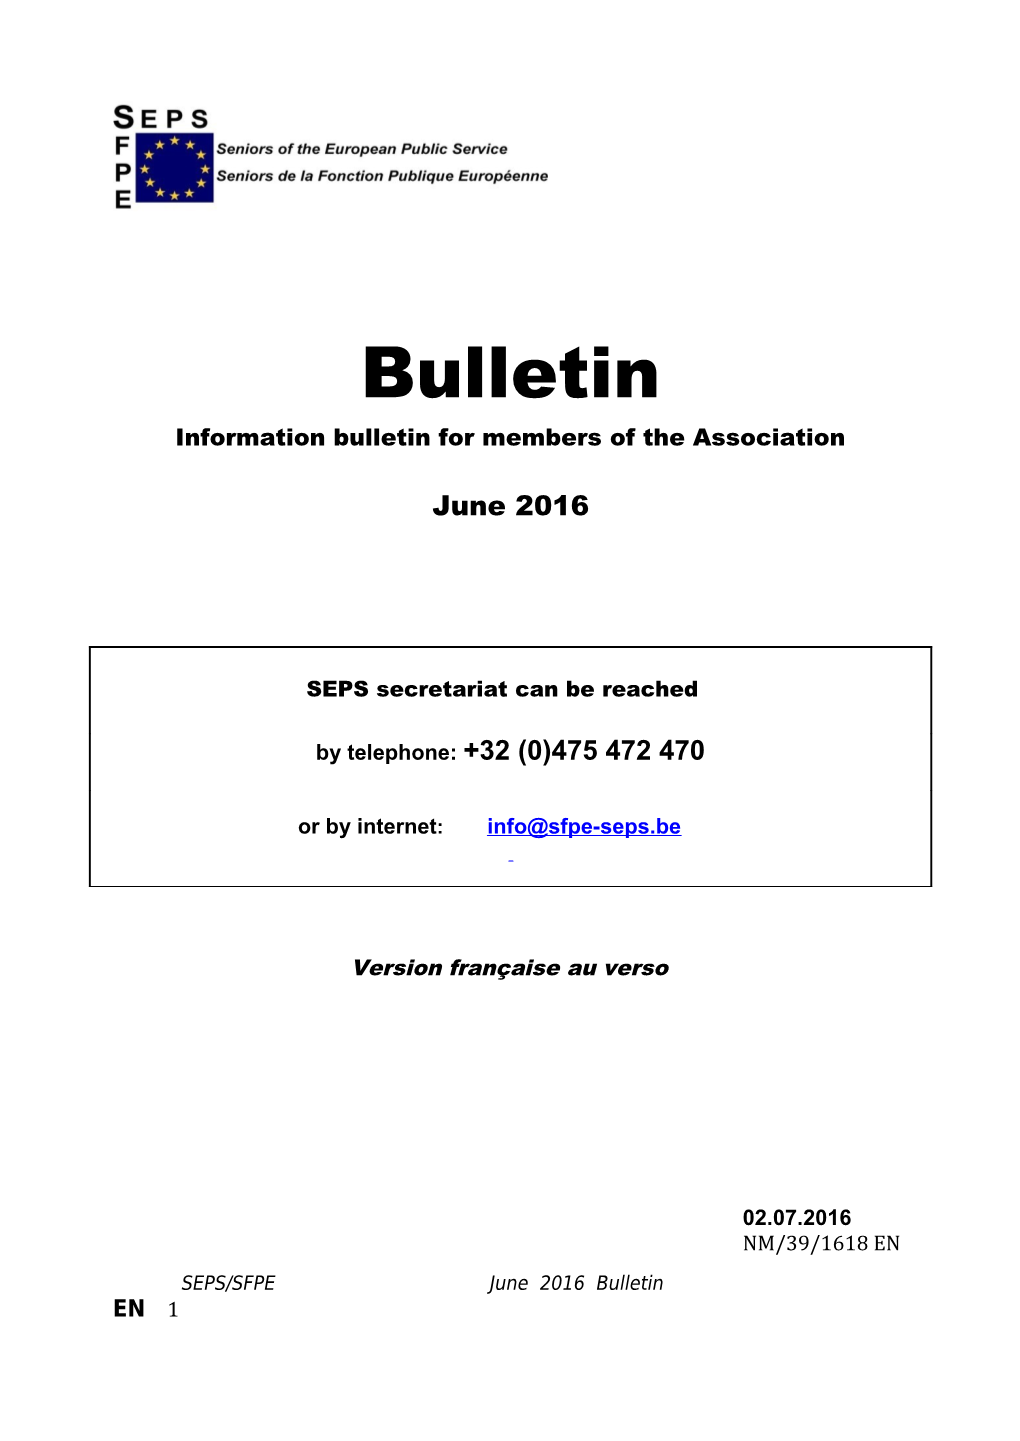 Information Bulletin for Members of the Association